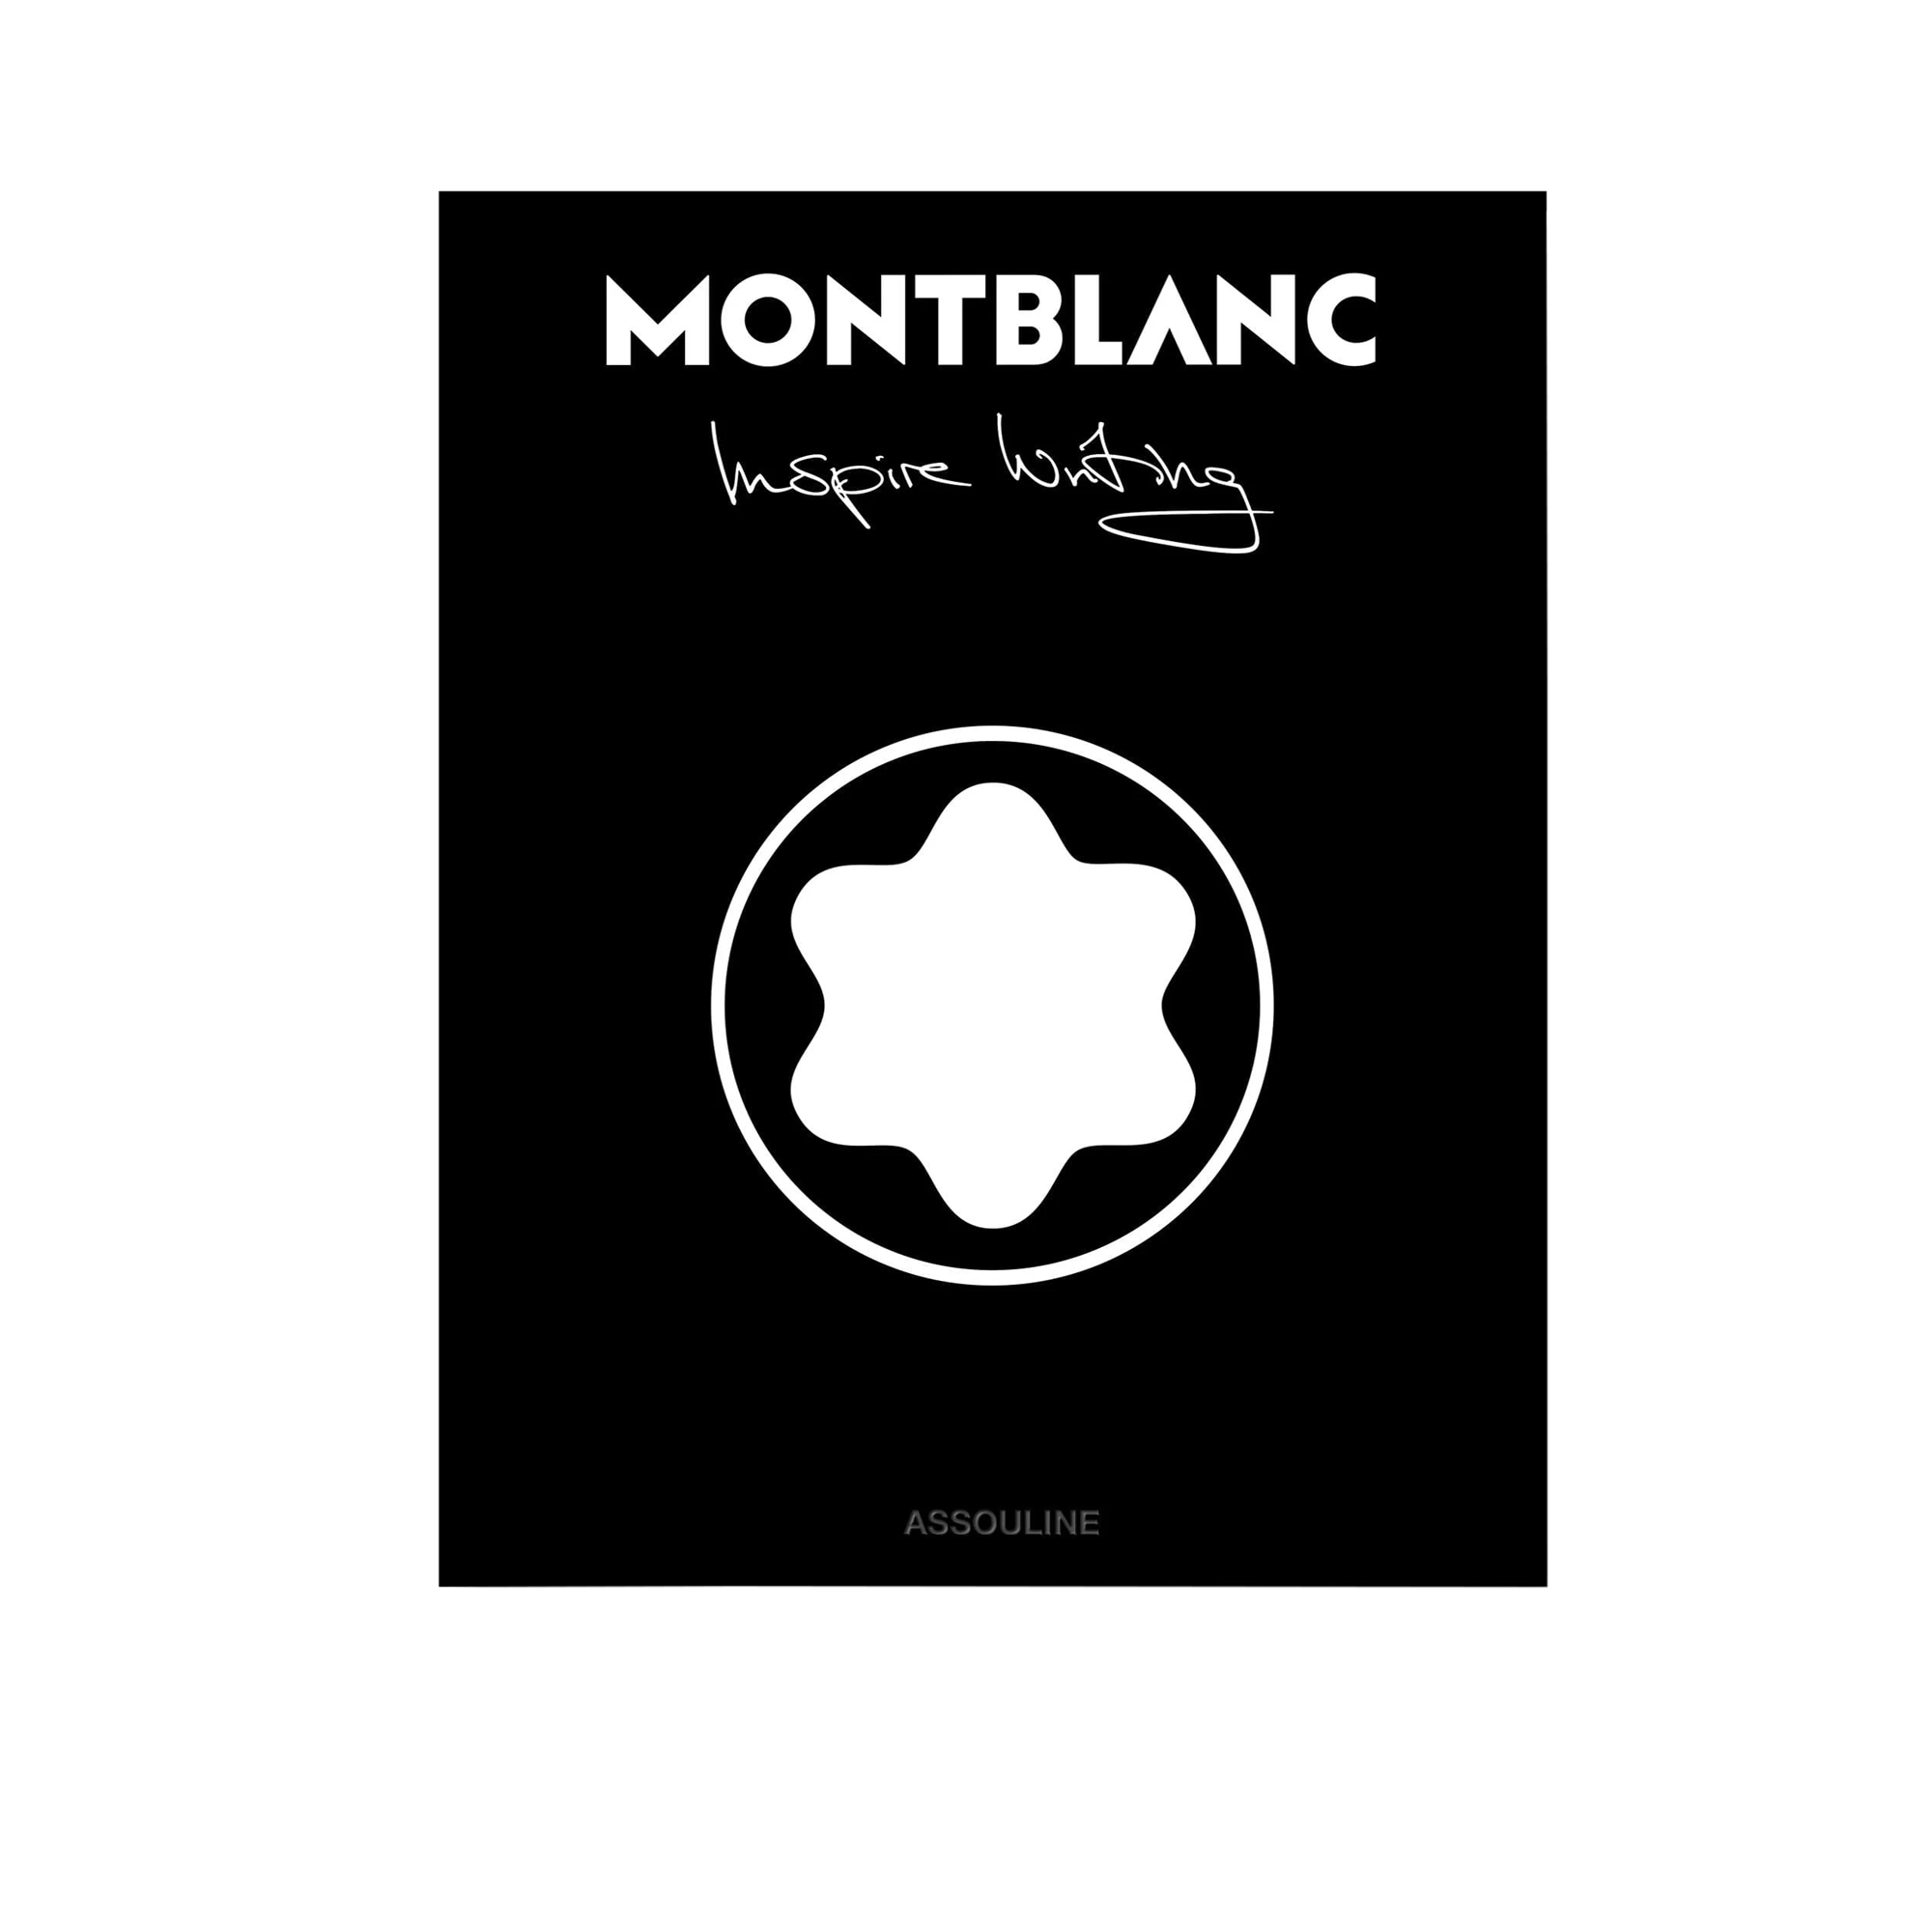 Montblanc Coffee Table Book